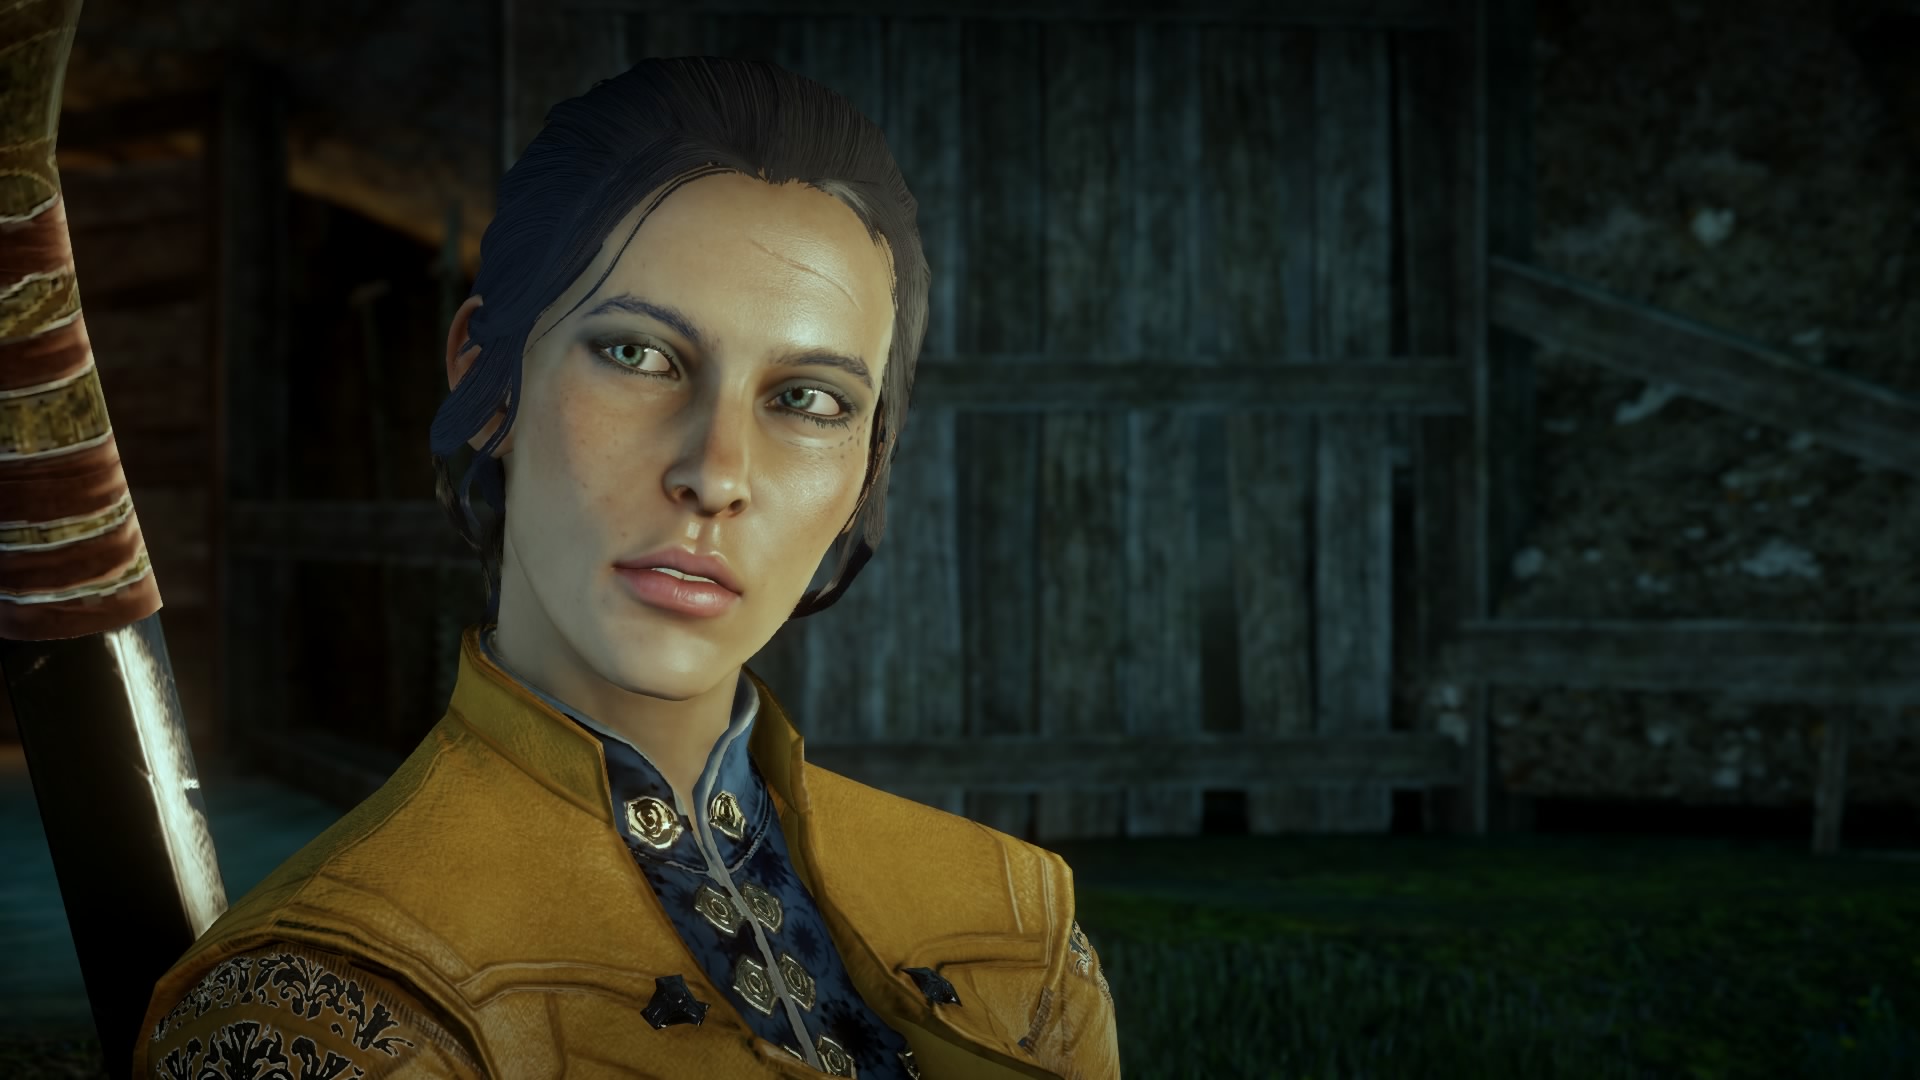 11 Things You Should Know About Dragon Age: Inquisition